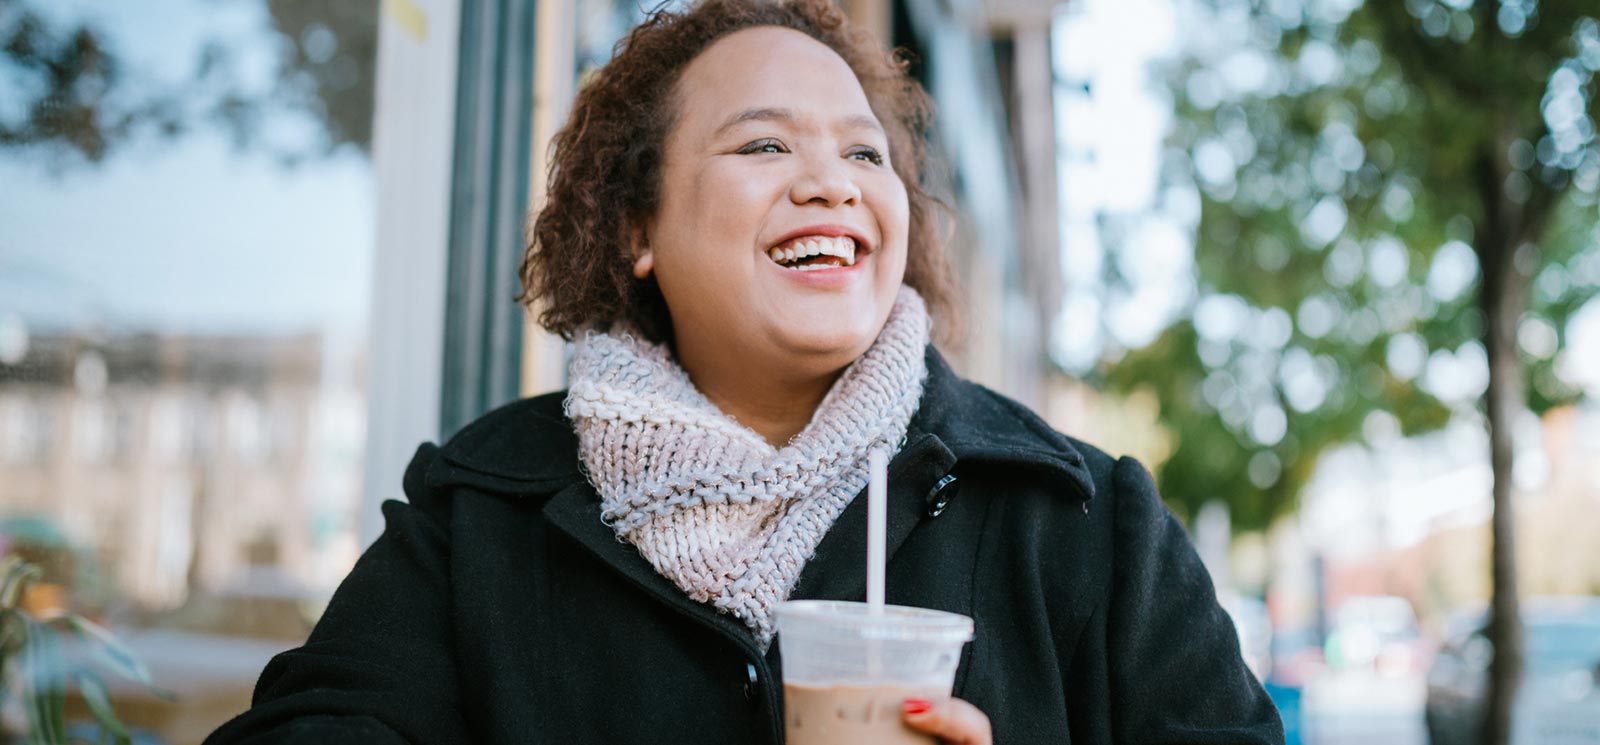 Woman smiling drinking iced coffee.